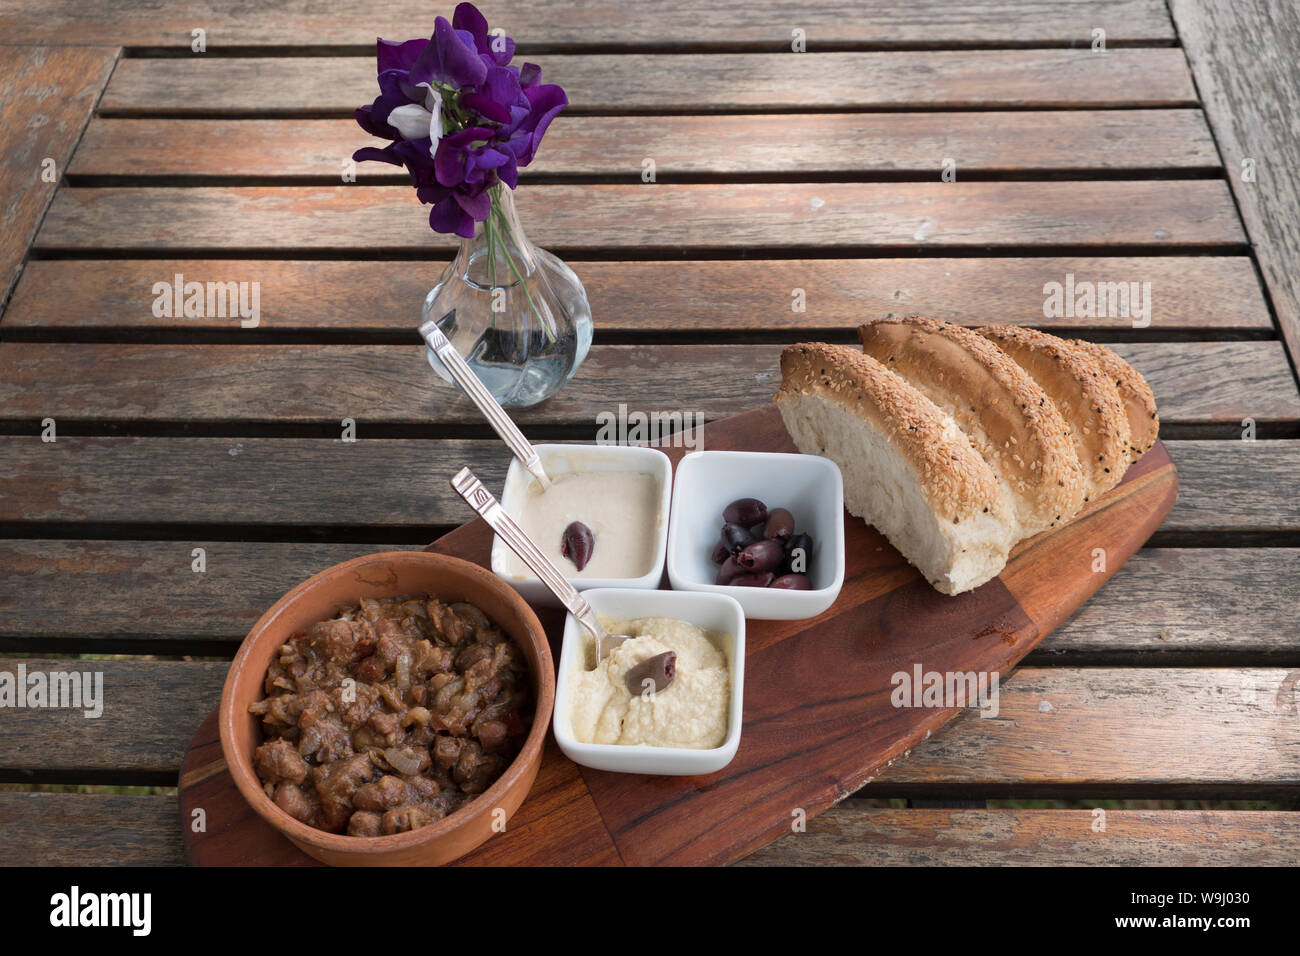 Vegan dishes of Fava Beans with dips and bread Stock Photo